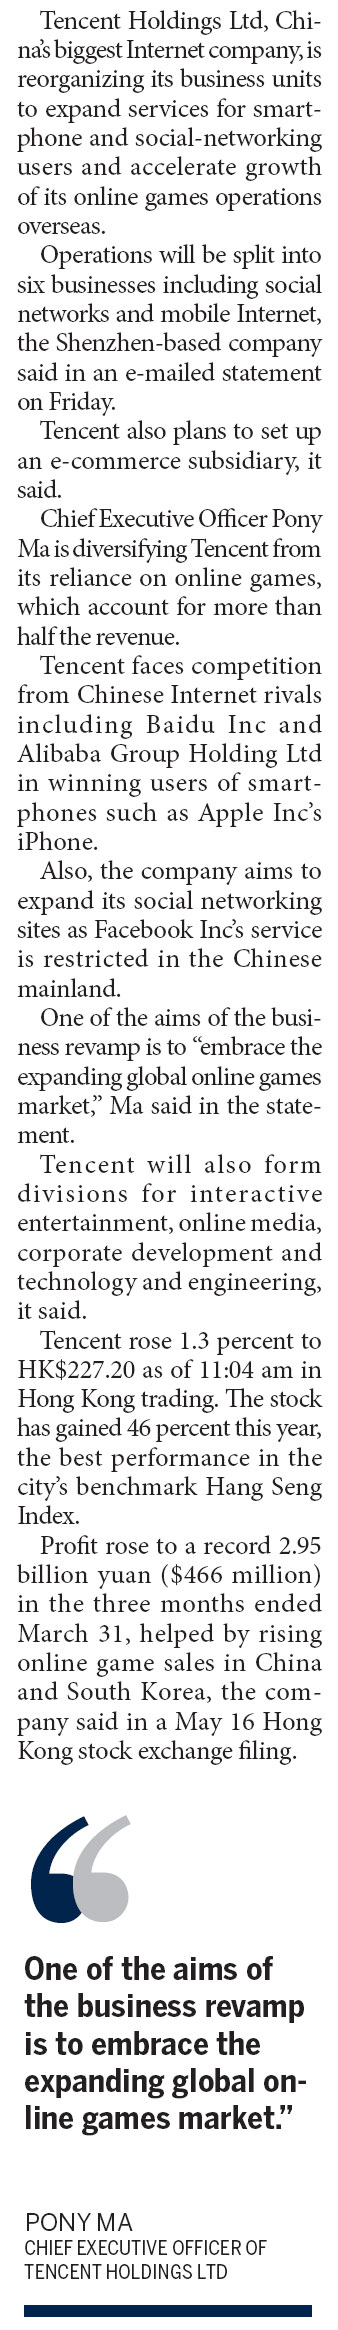 Tencent to expand smartphone business